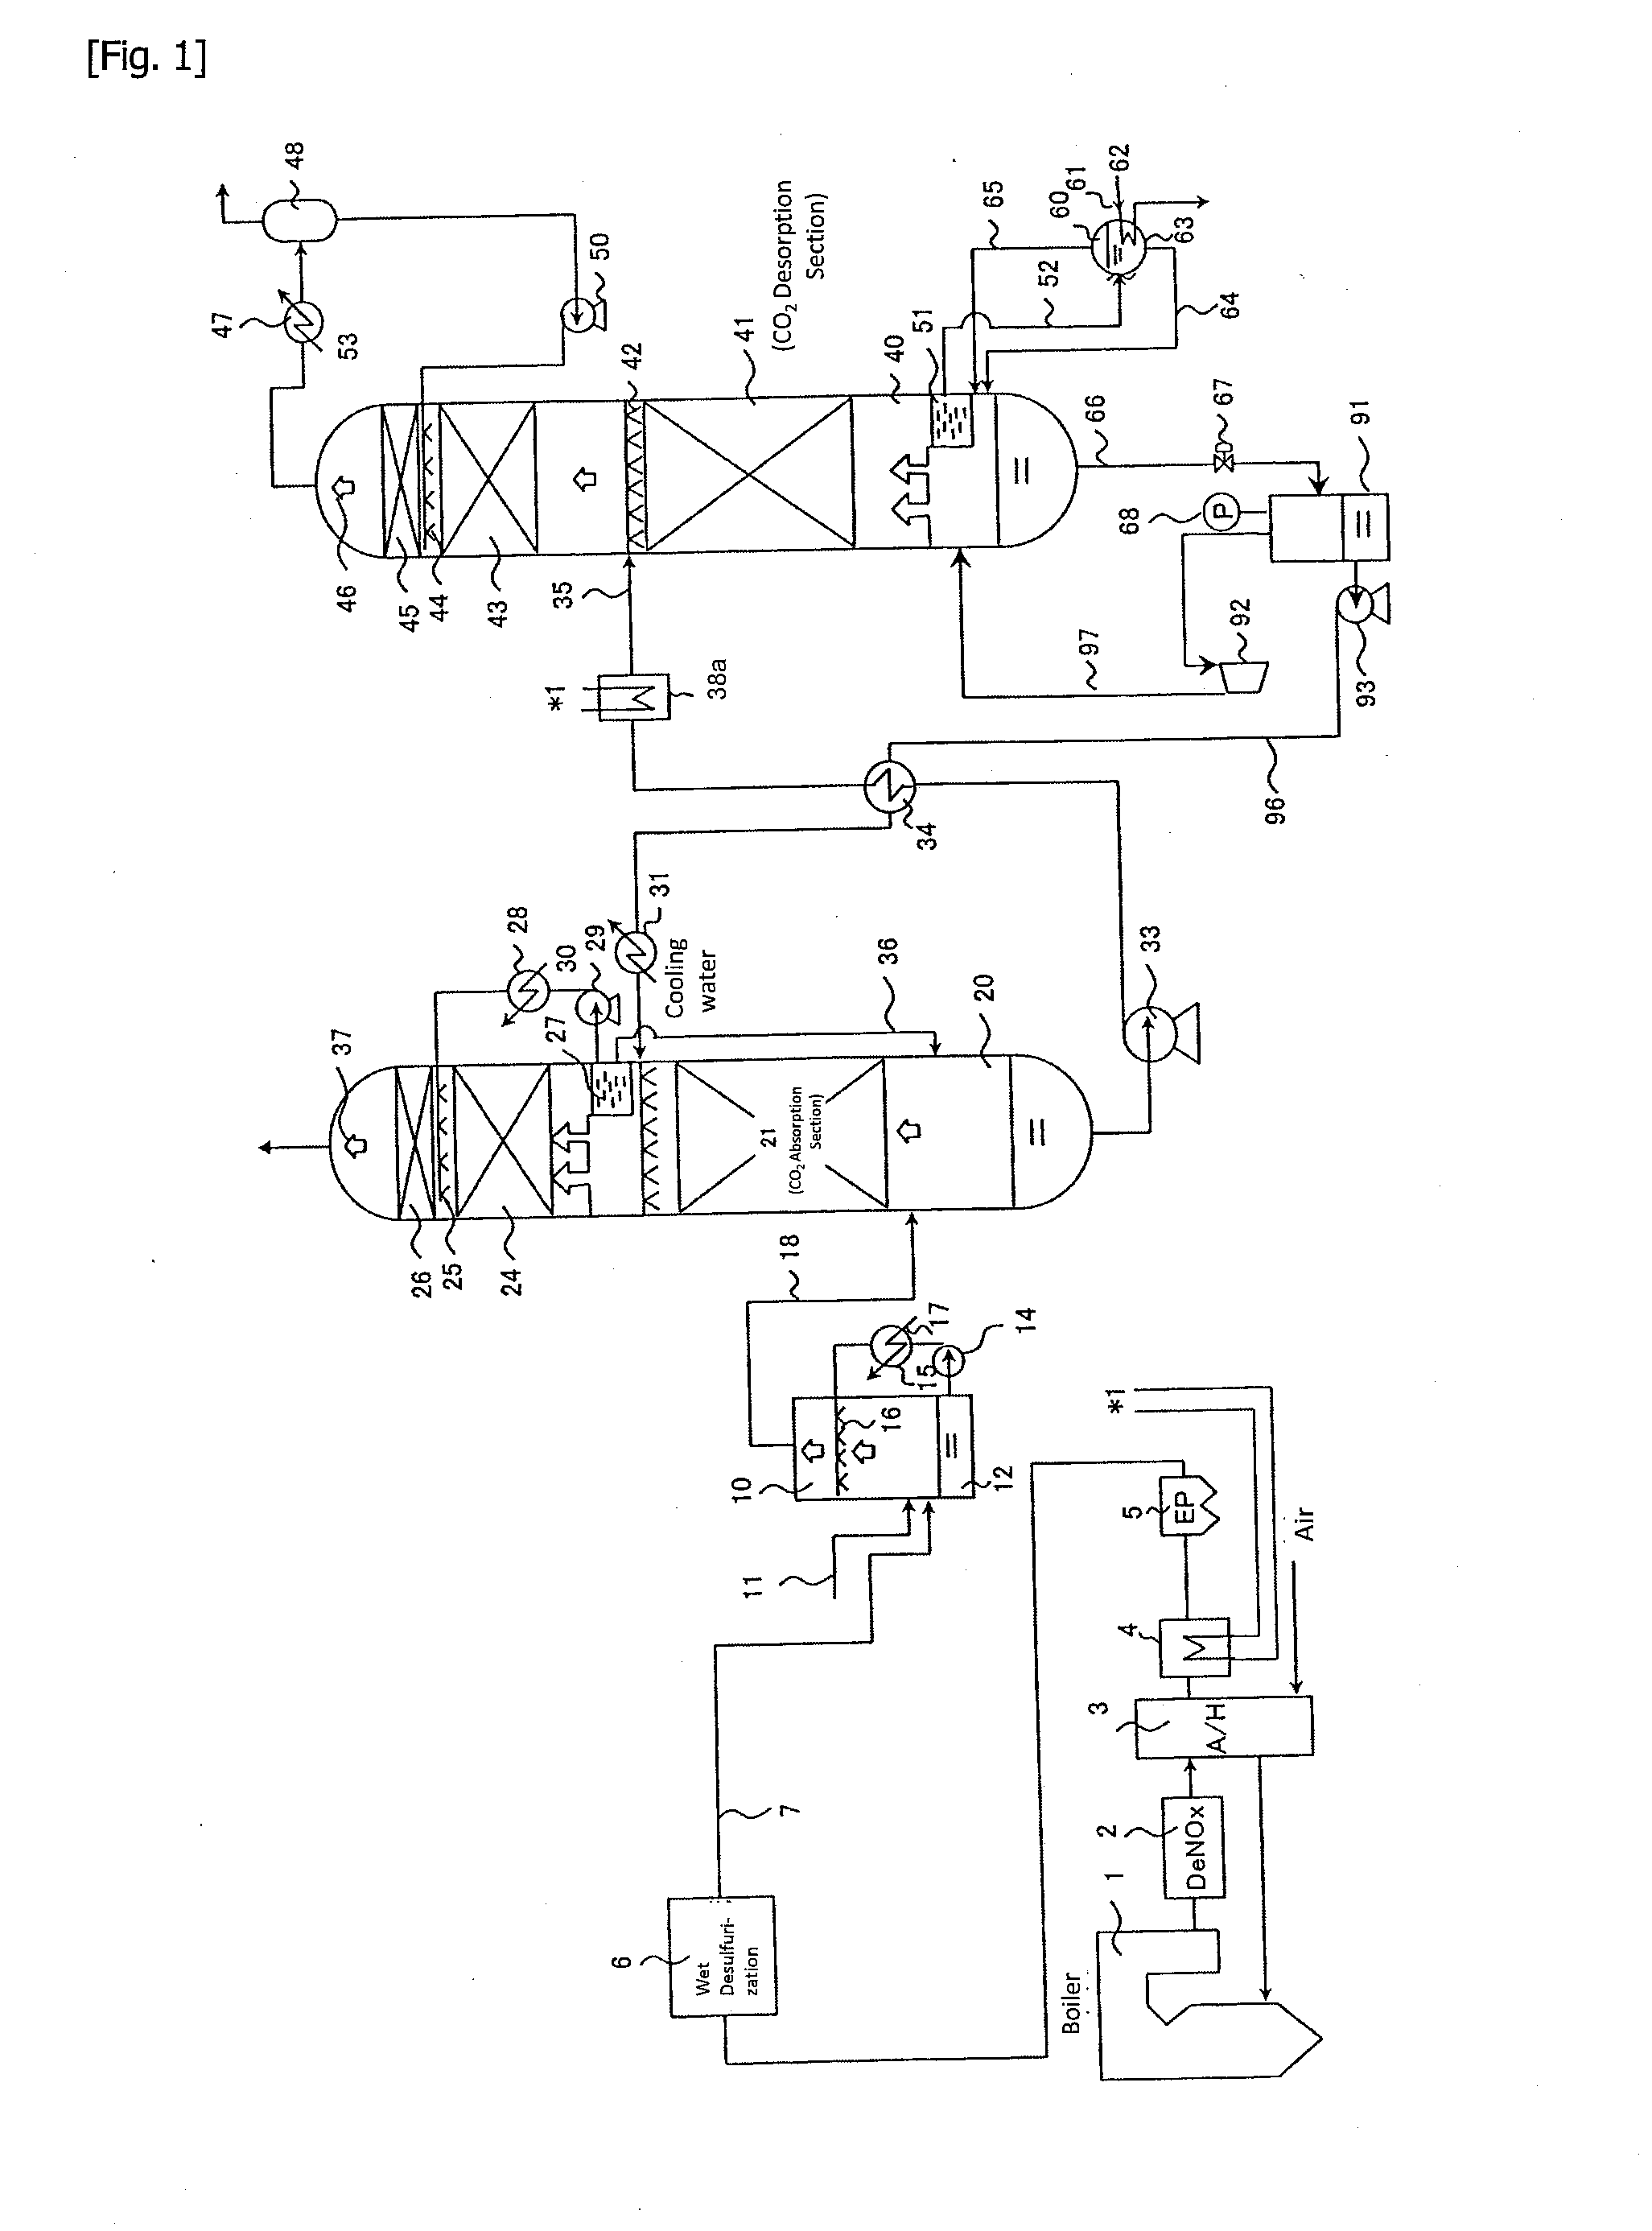 Combustion exhaust gas treatment system and method of treating combustion exhaust gas